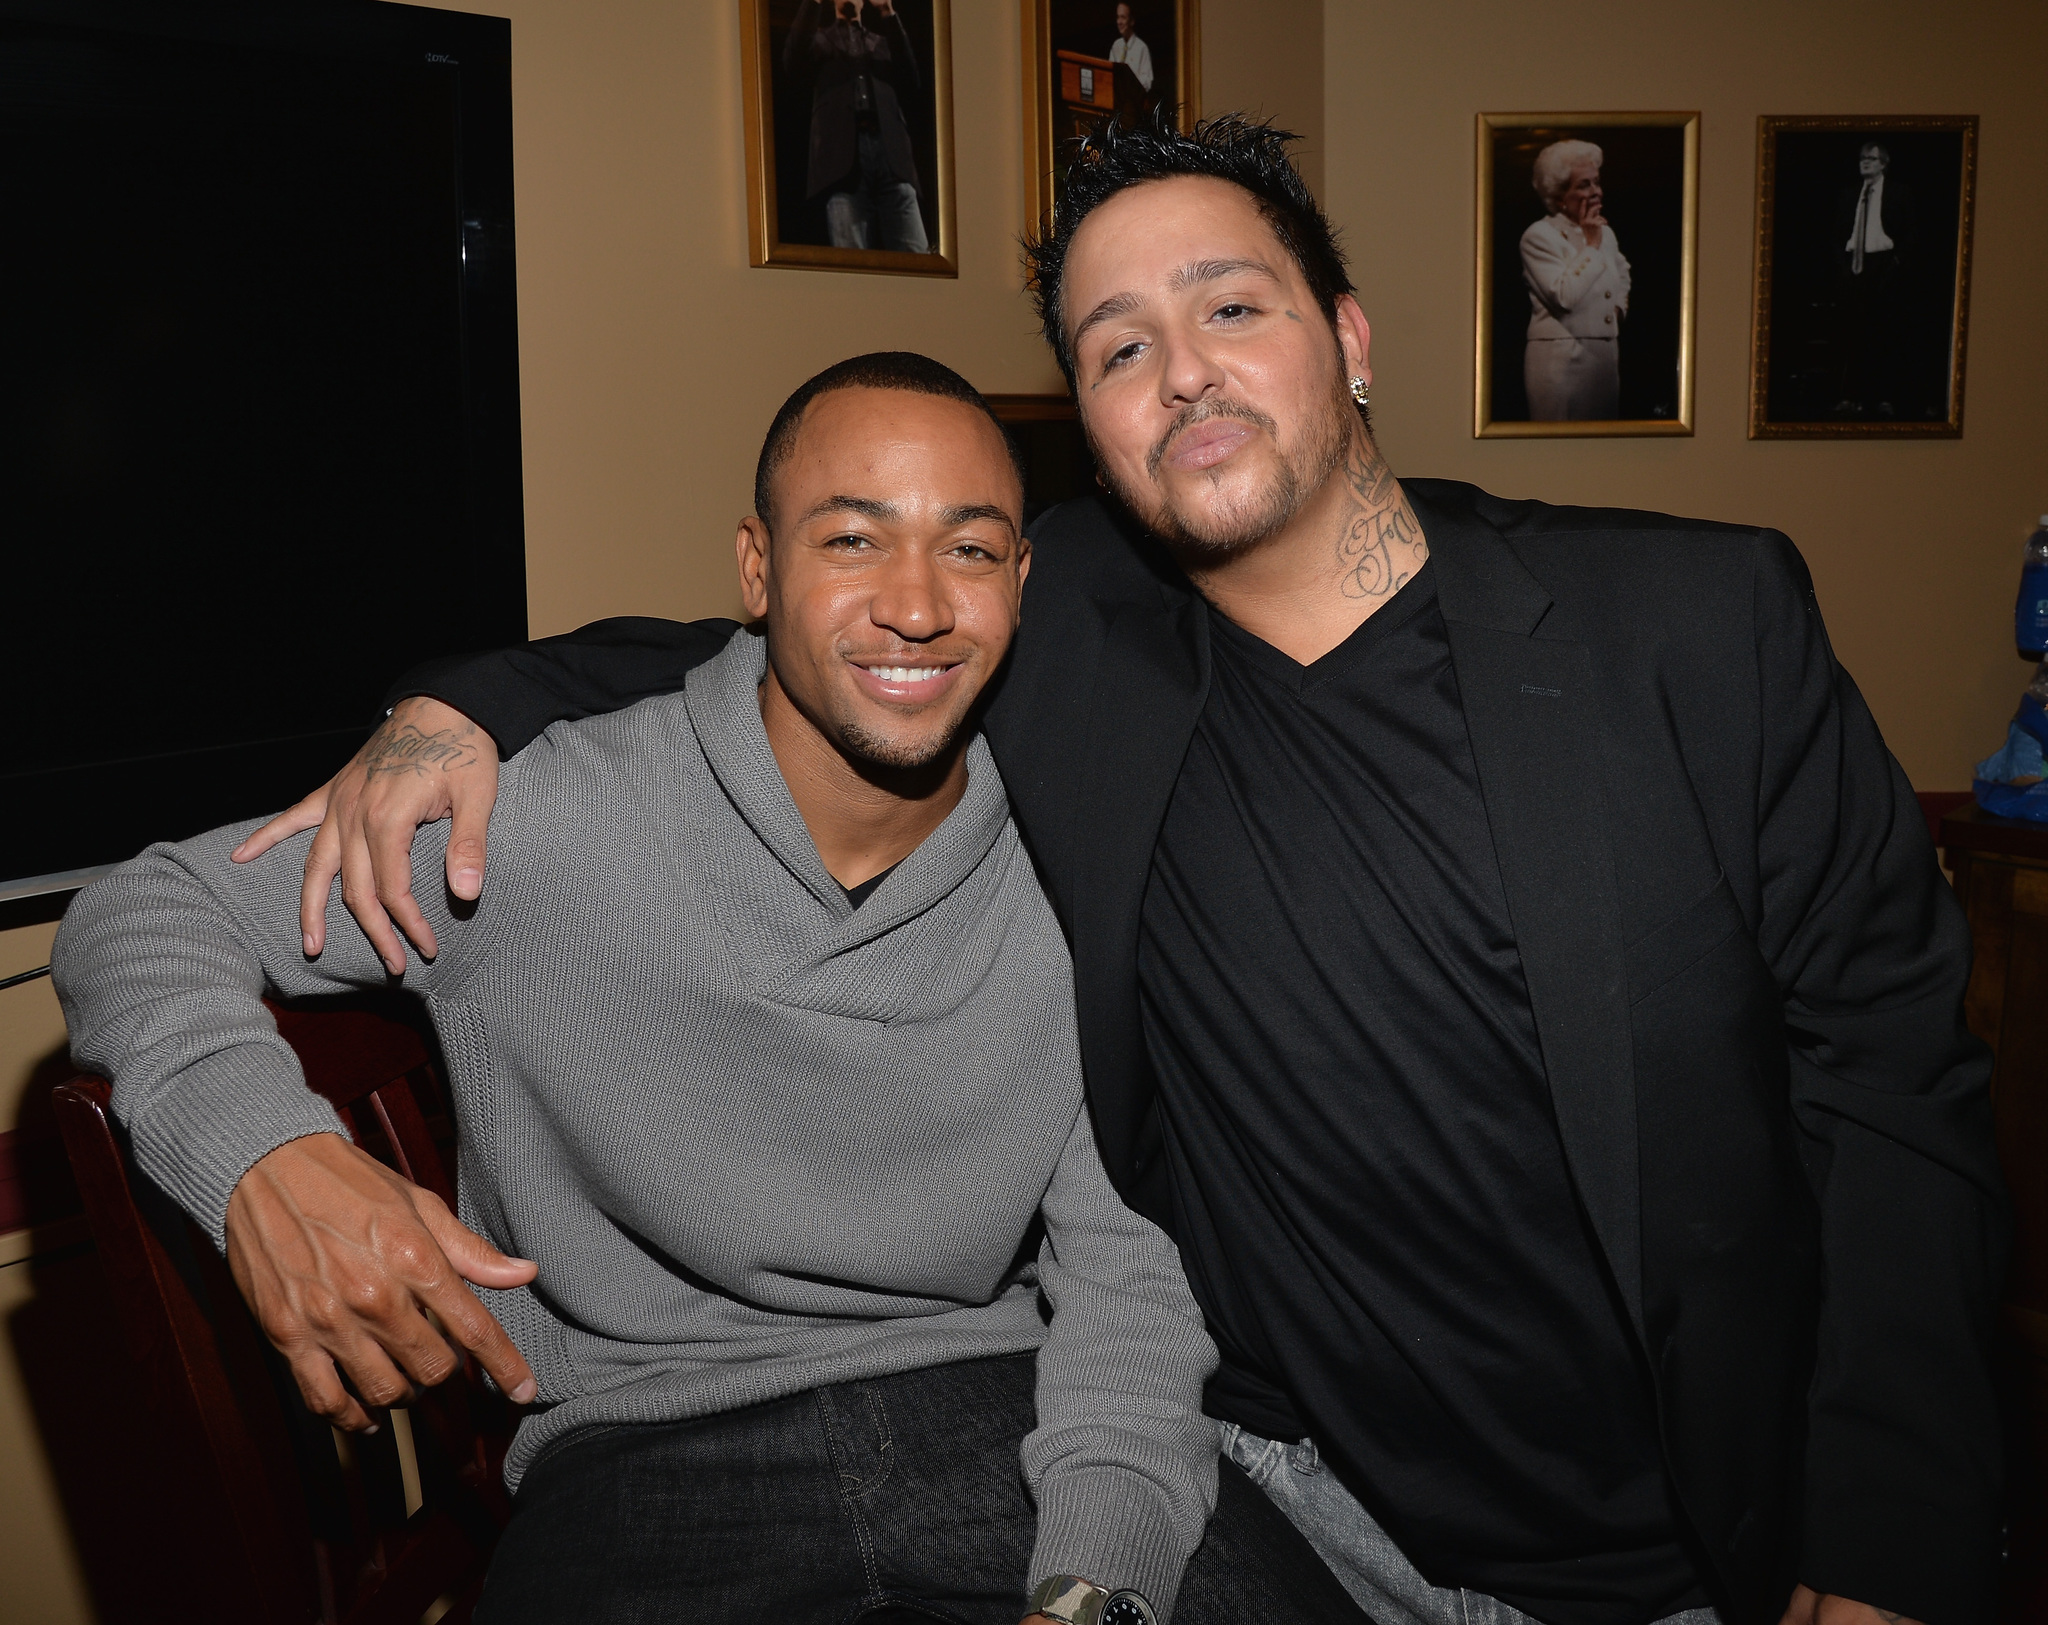 Francis Capra and Percy Daggs III at event of Veronica Mars (2014)